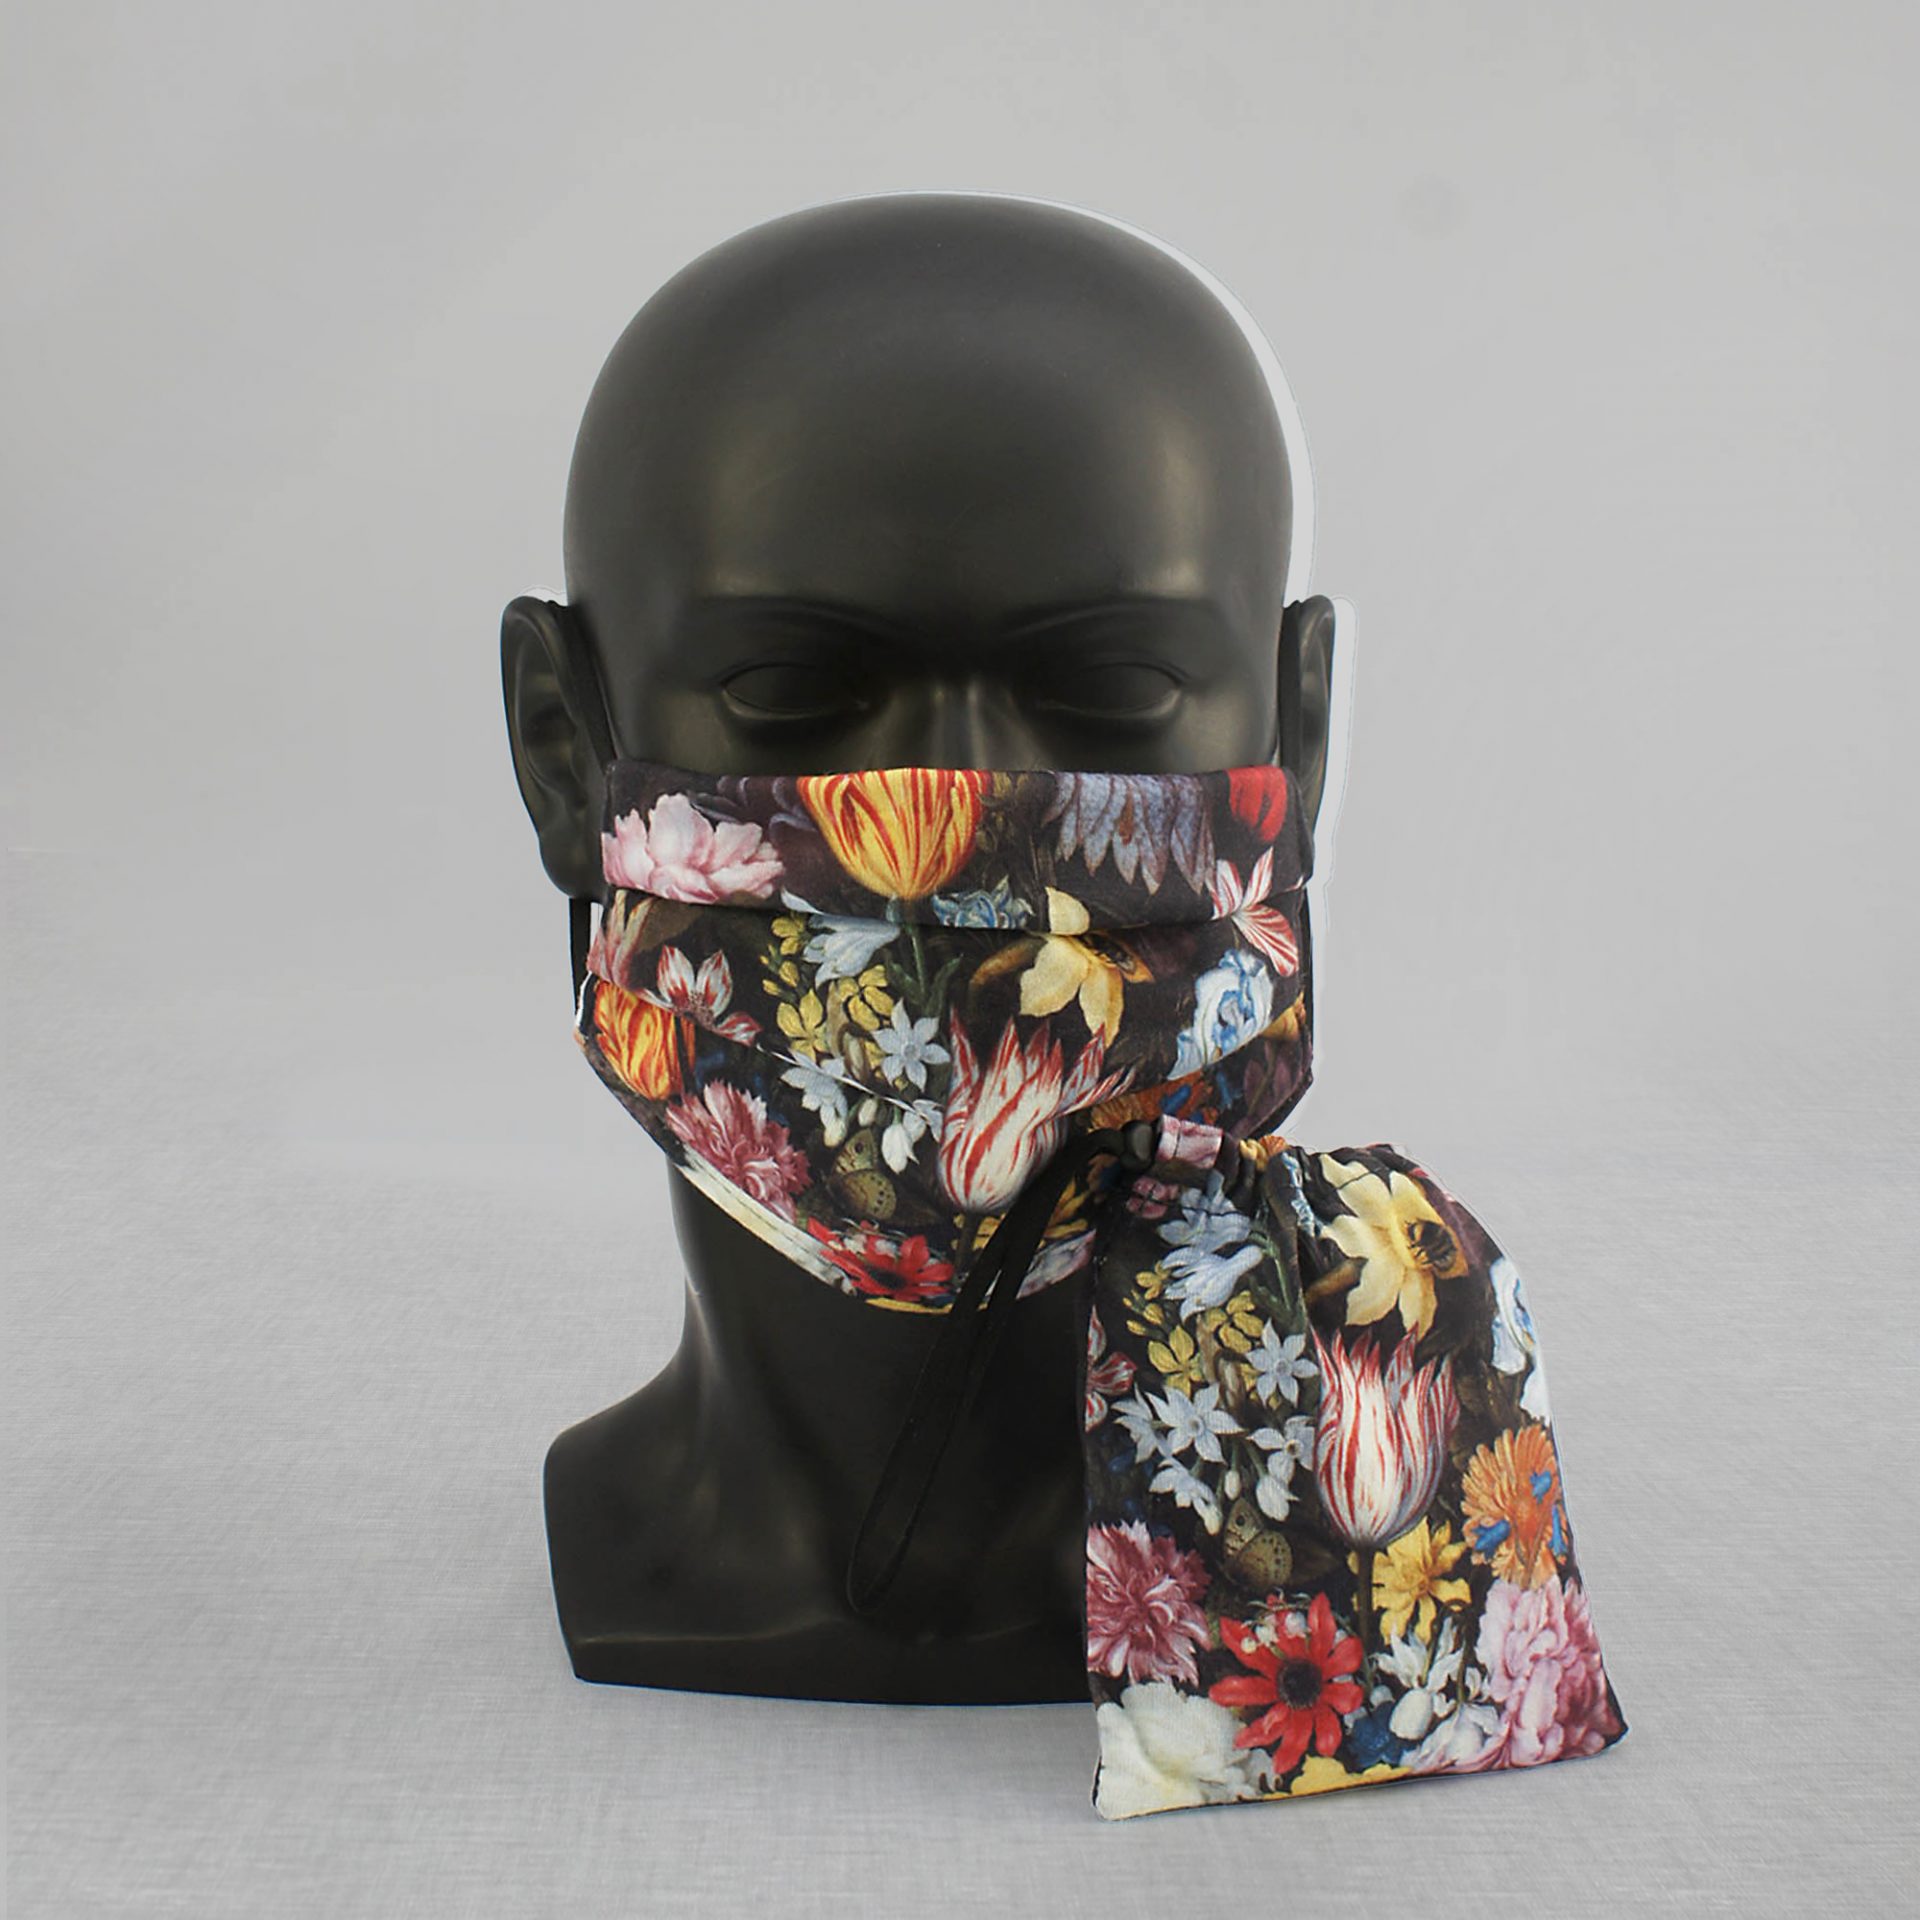 Printed face mask